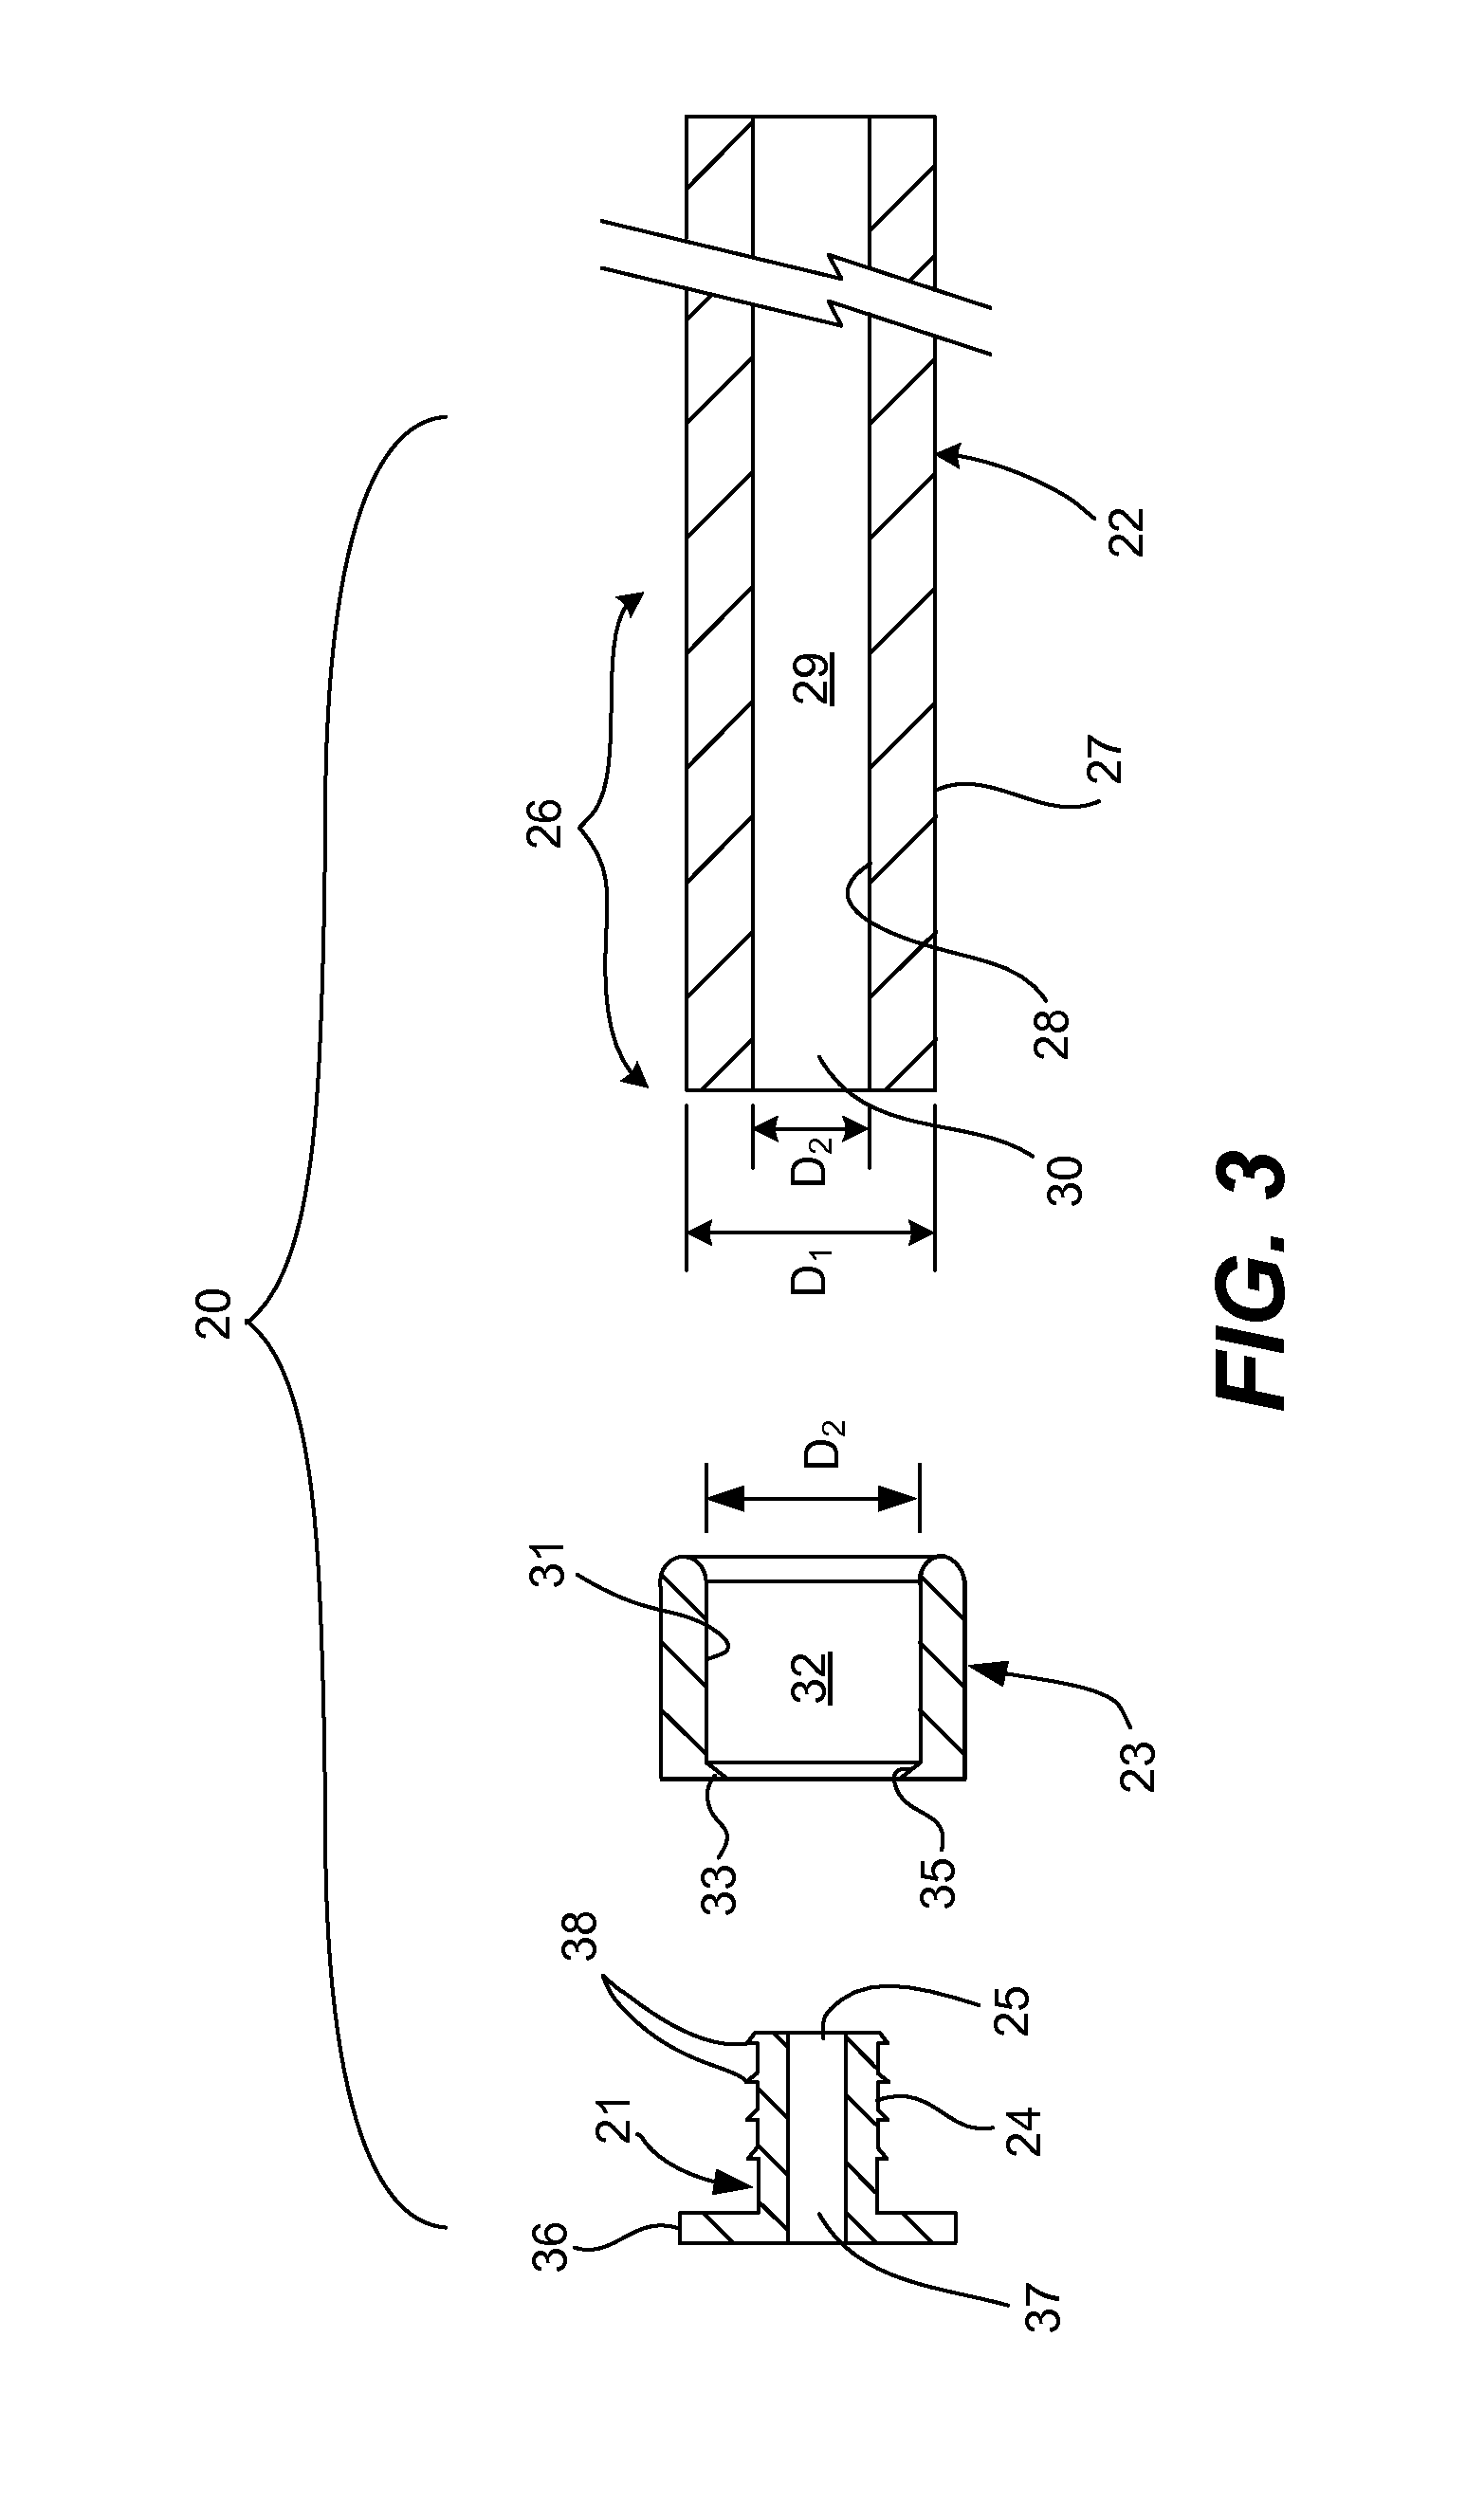 Tube fitting connection system and method